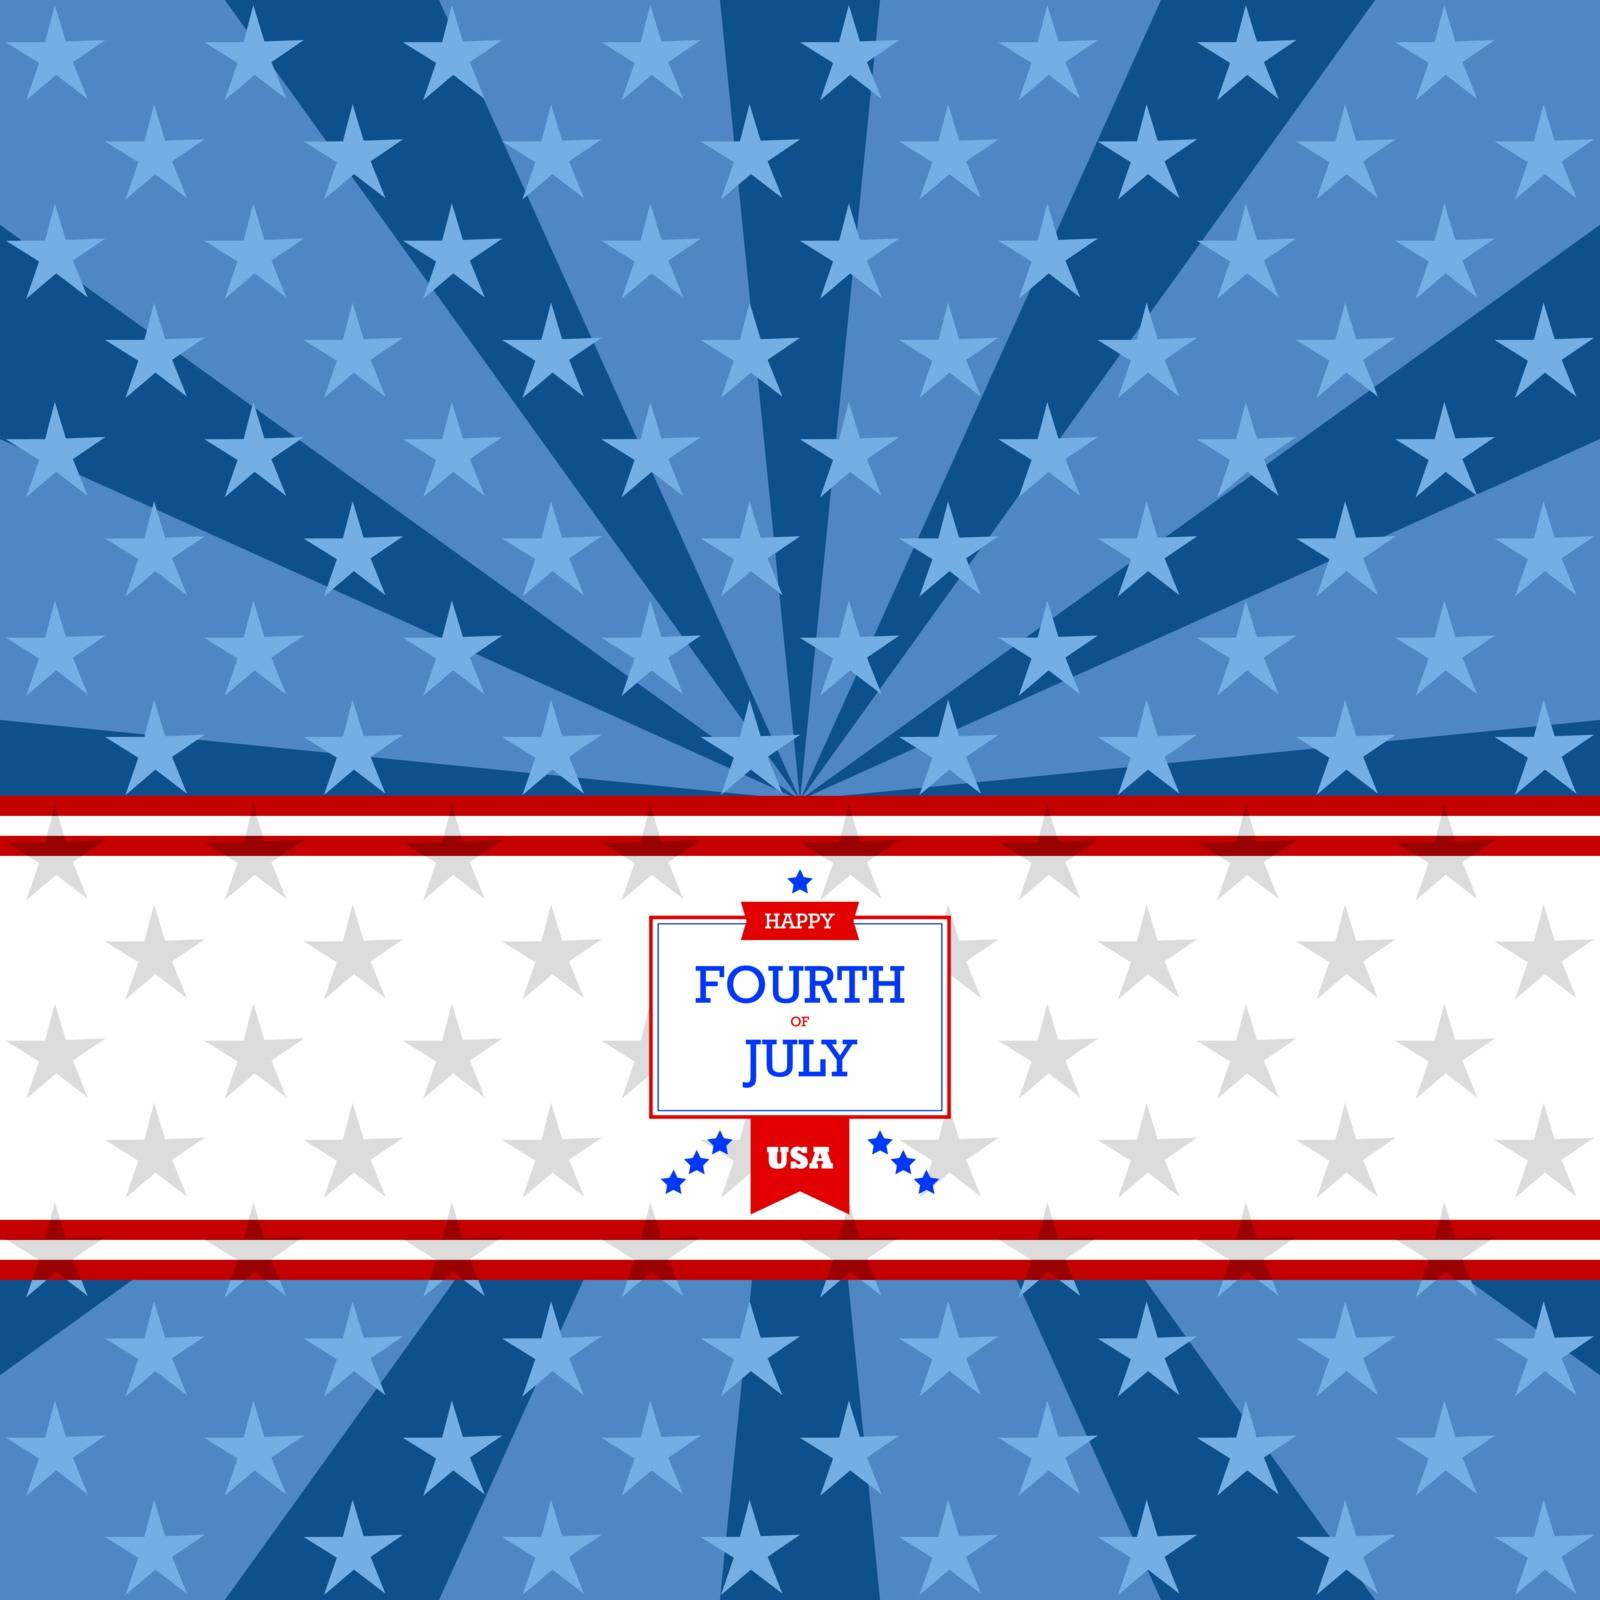 Background illustration showing stripes and stars with a "Happy Fourth of July" message